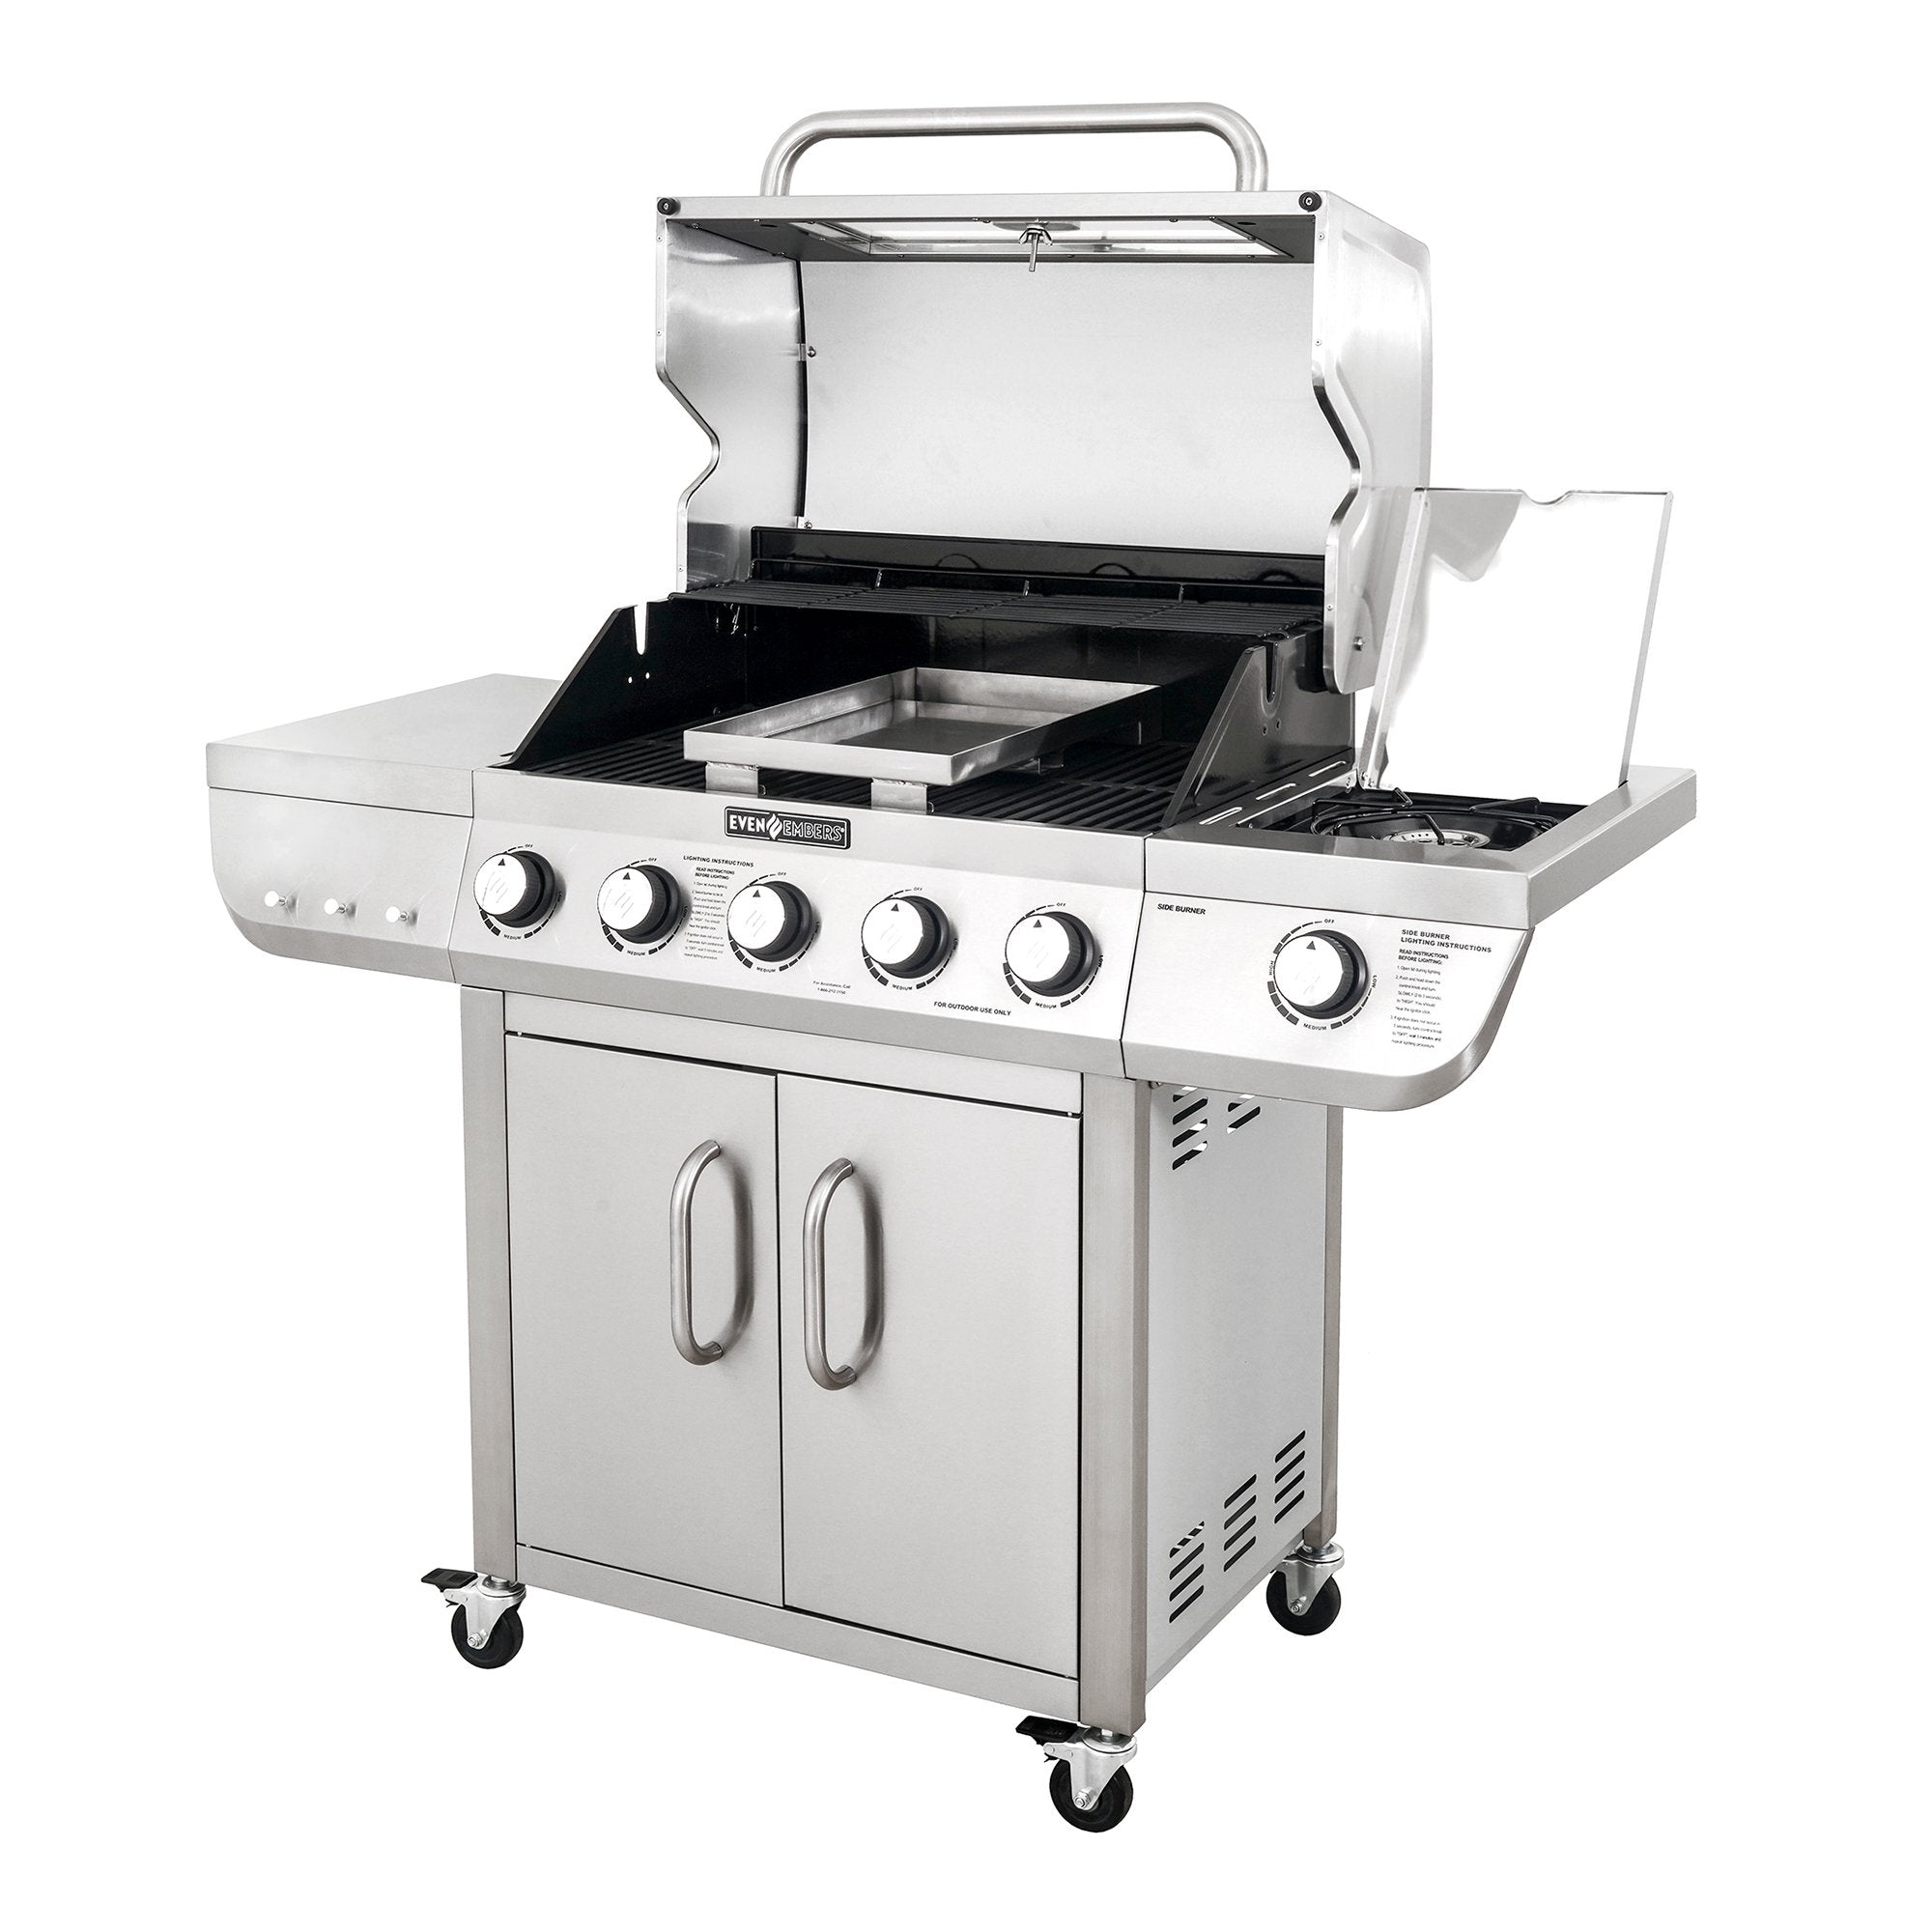 Even Embers Five Burner Stainless Steel Gas Grill with Window